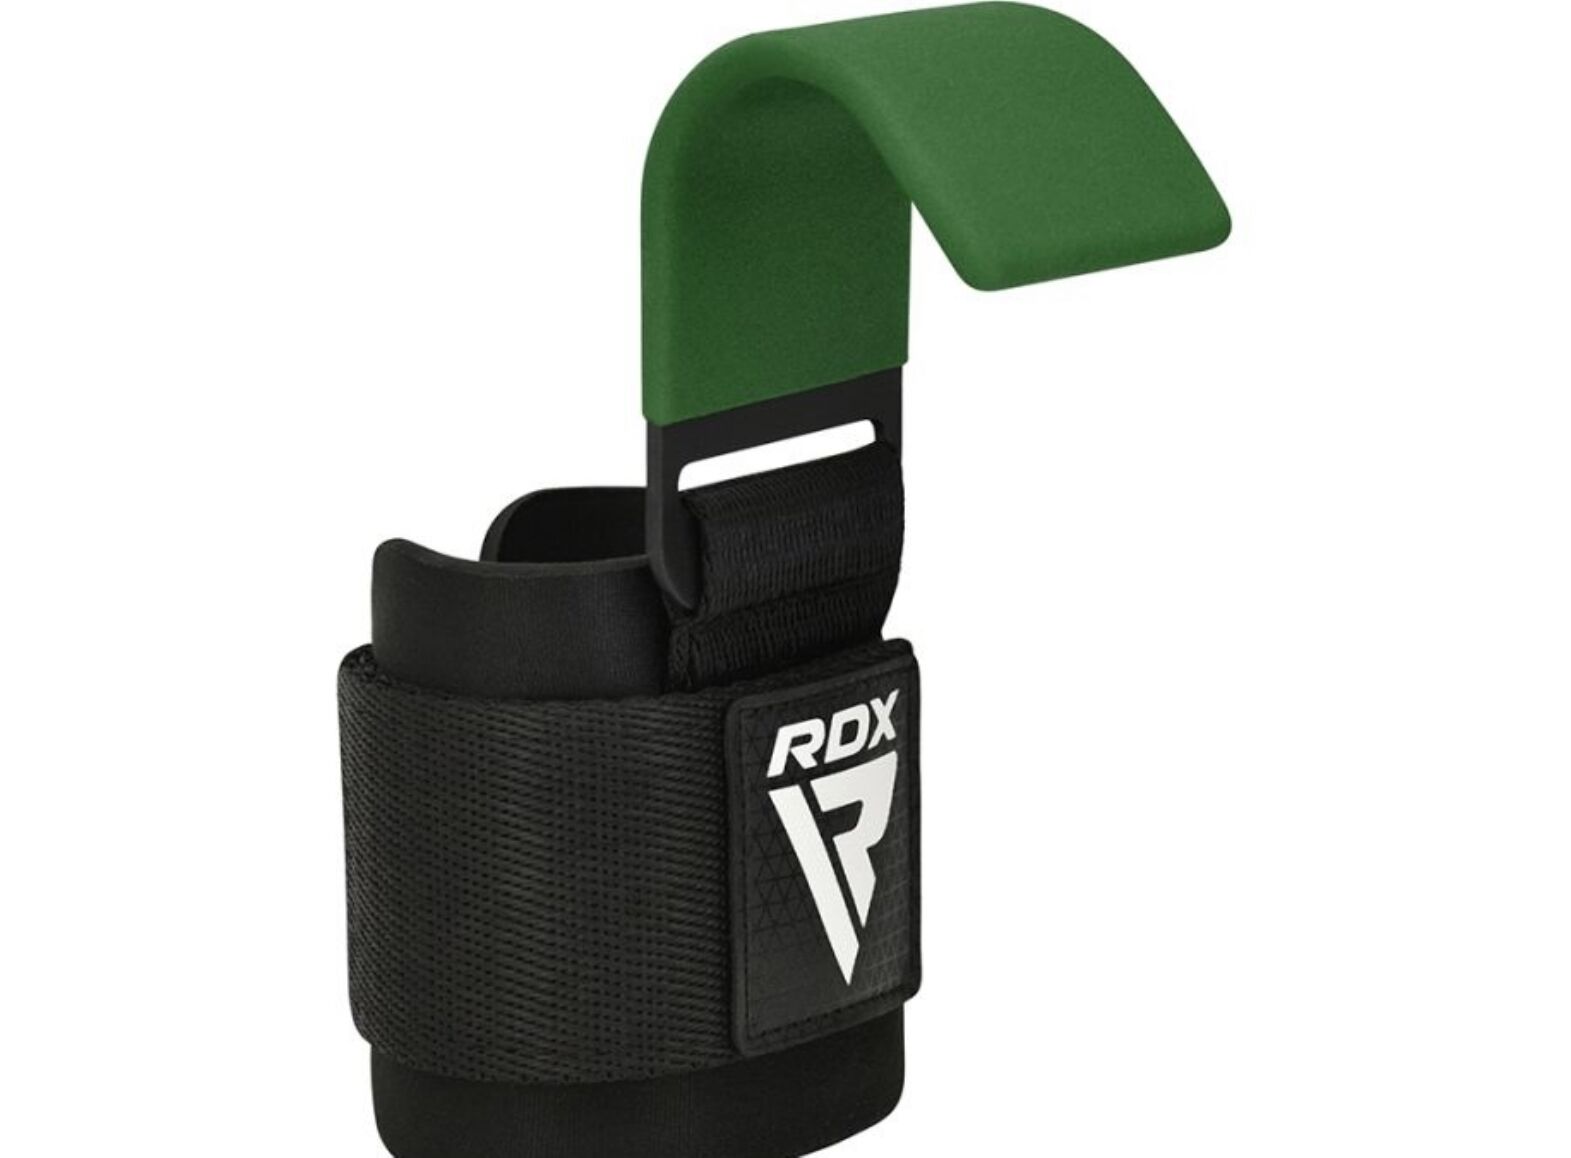 Rdx W5 Gym Weight Lifting Hook Straps